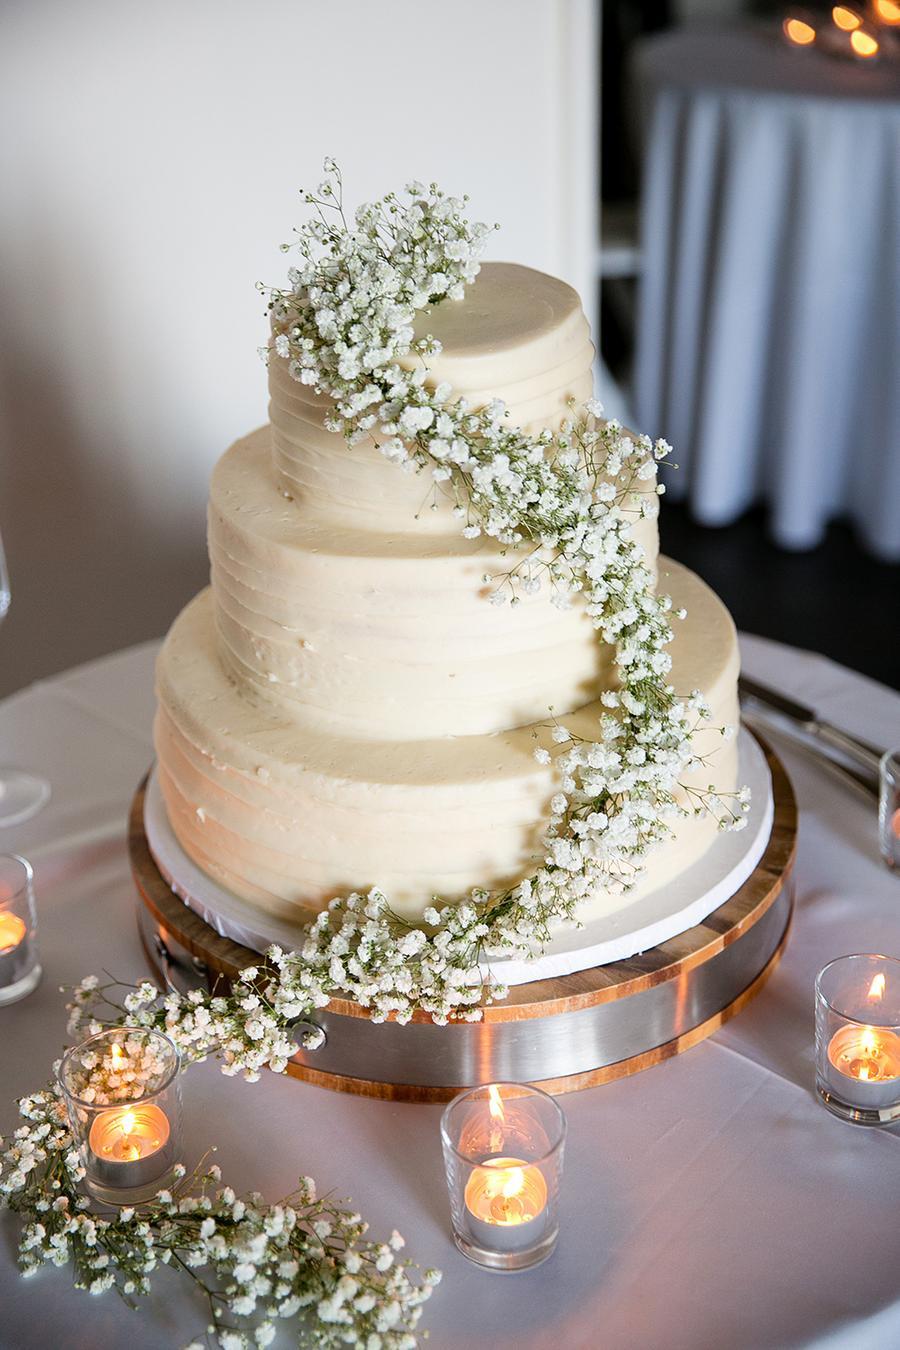 How to Choose the Right Type of Frosting for Your Wedding Cake